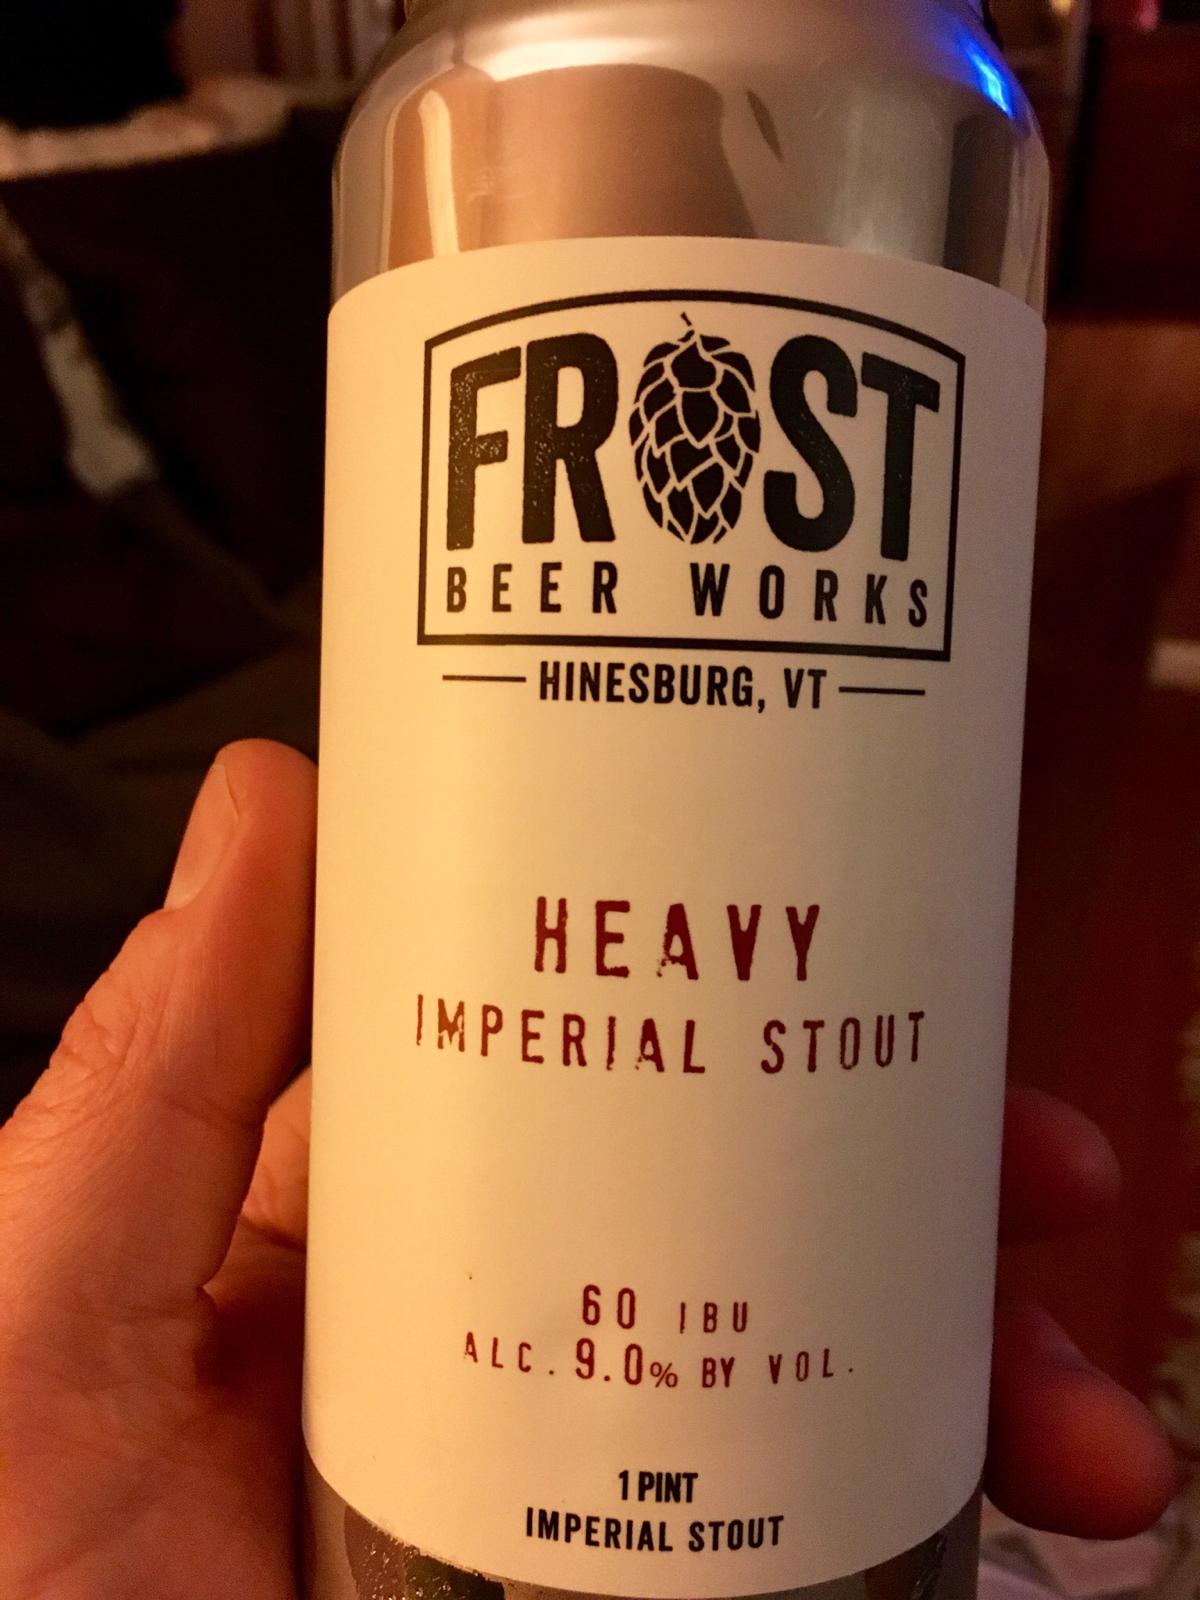 Heavy Imperial Stout